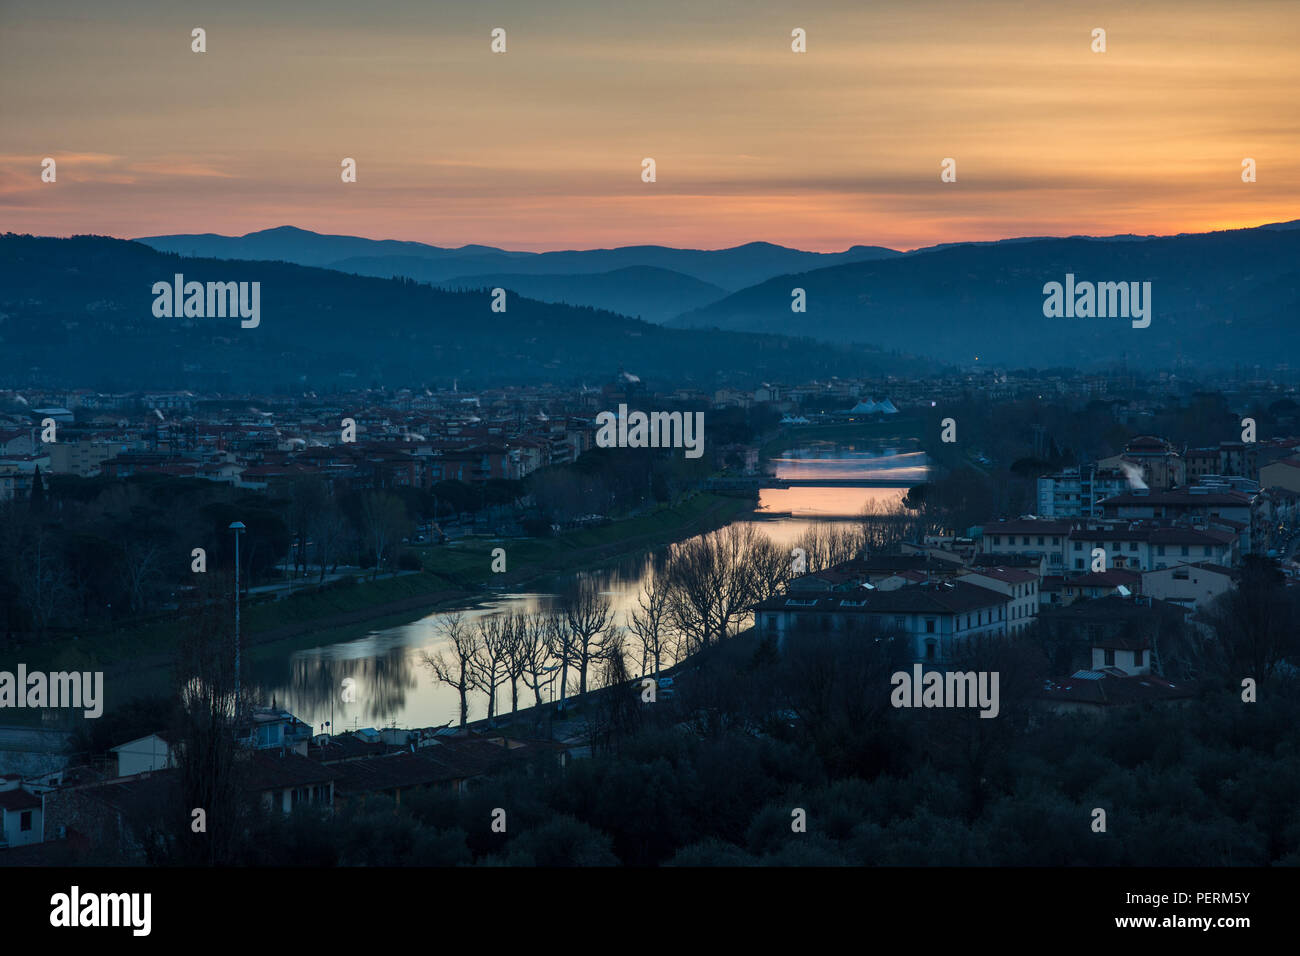 The sun rises over the River Arno and the suburbs of Florence, with the Fiesolean Hills providing a backdrop. Stock Photo